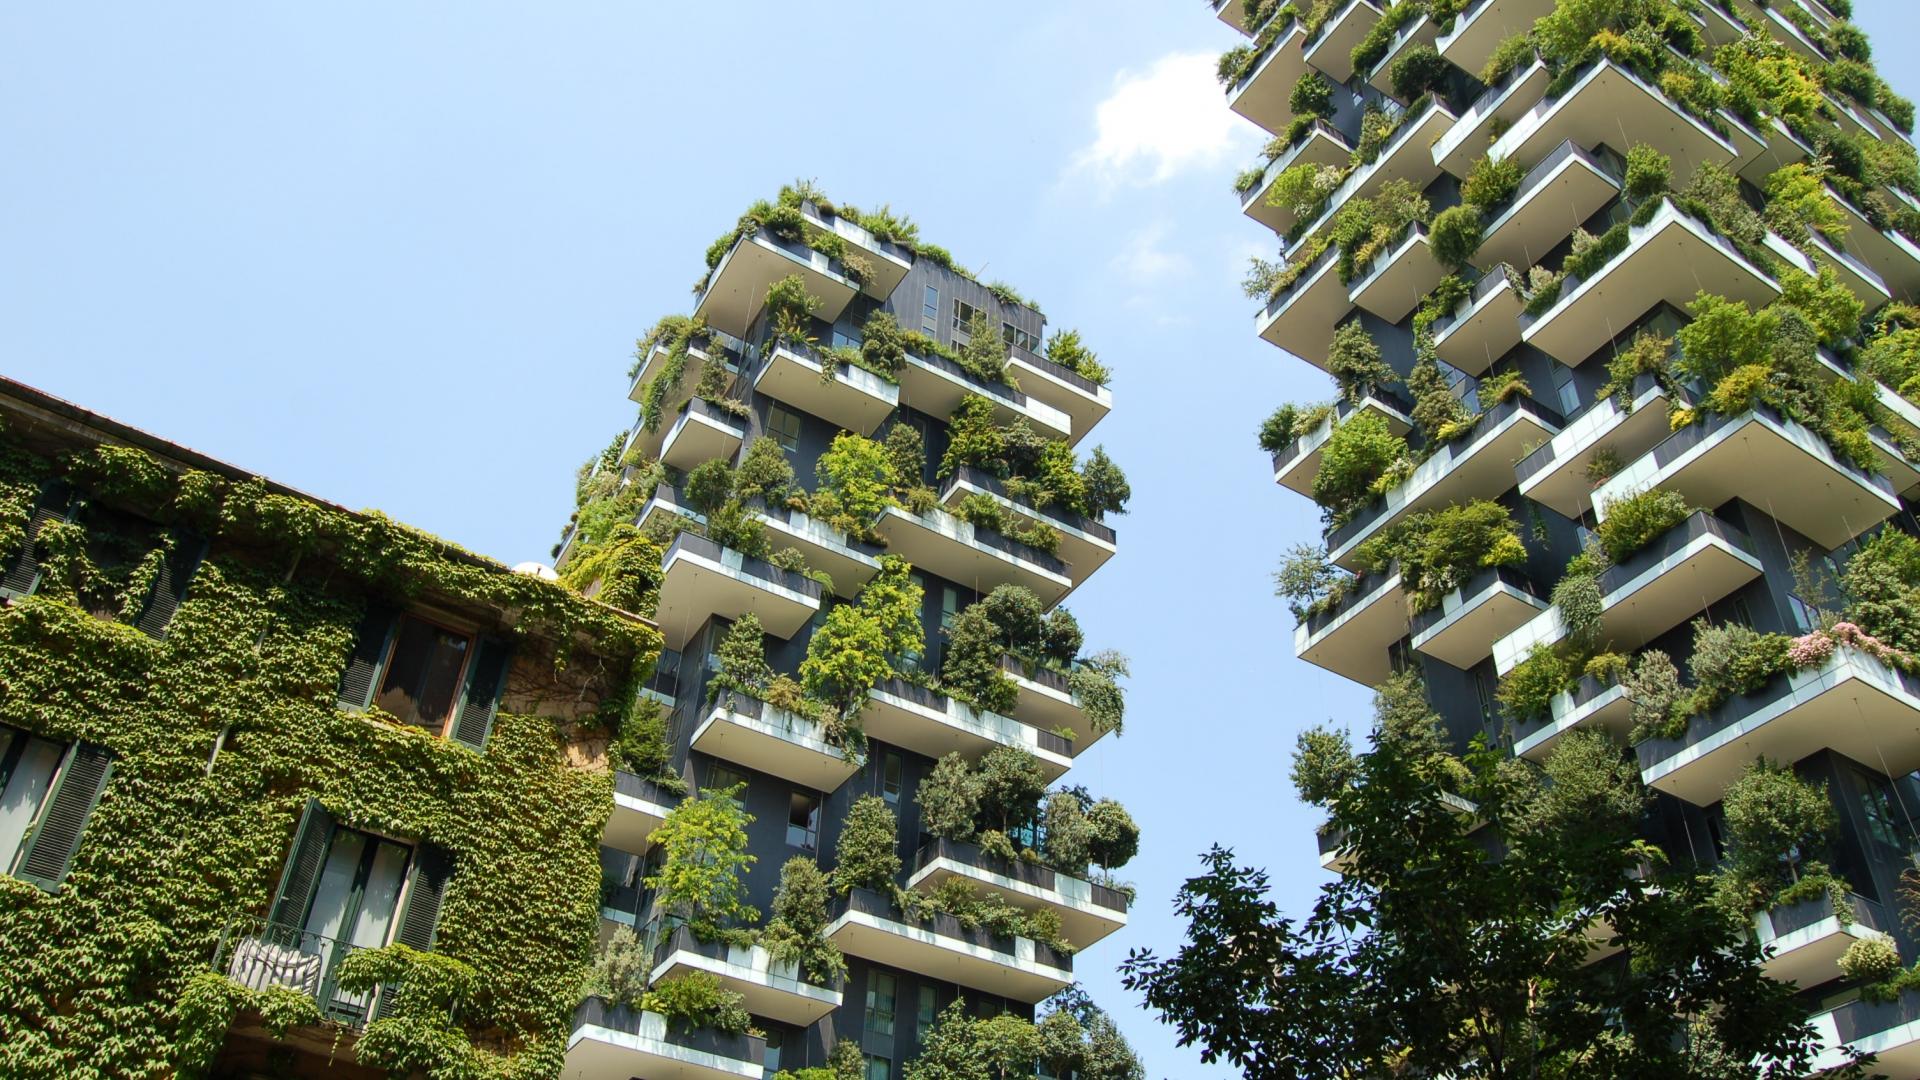 Photo of a high-rise urban building covered in greenery